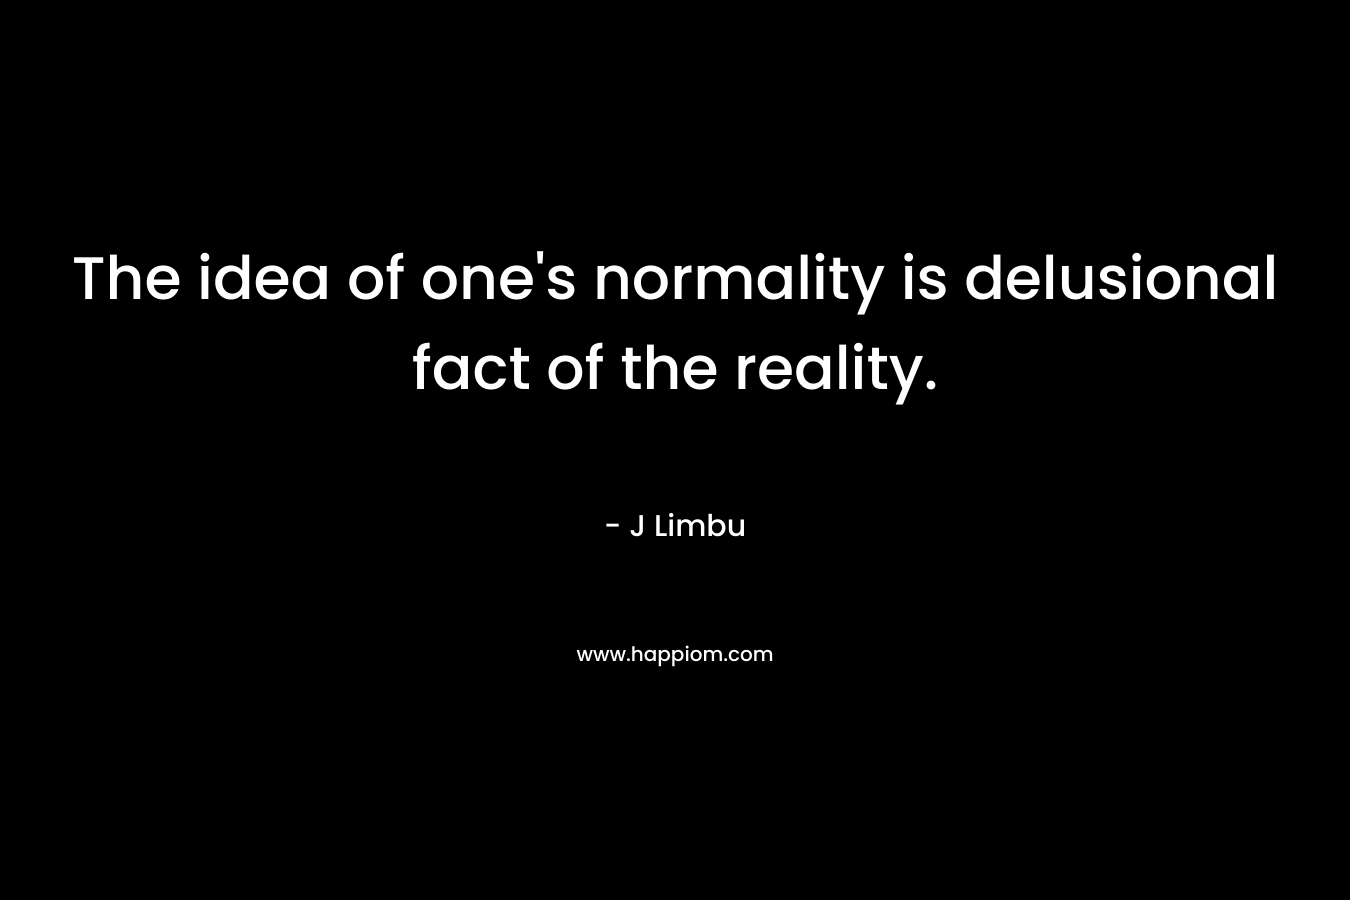 The idea of one's normality is delusional fact of the reality.